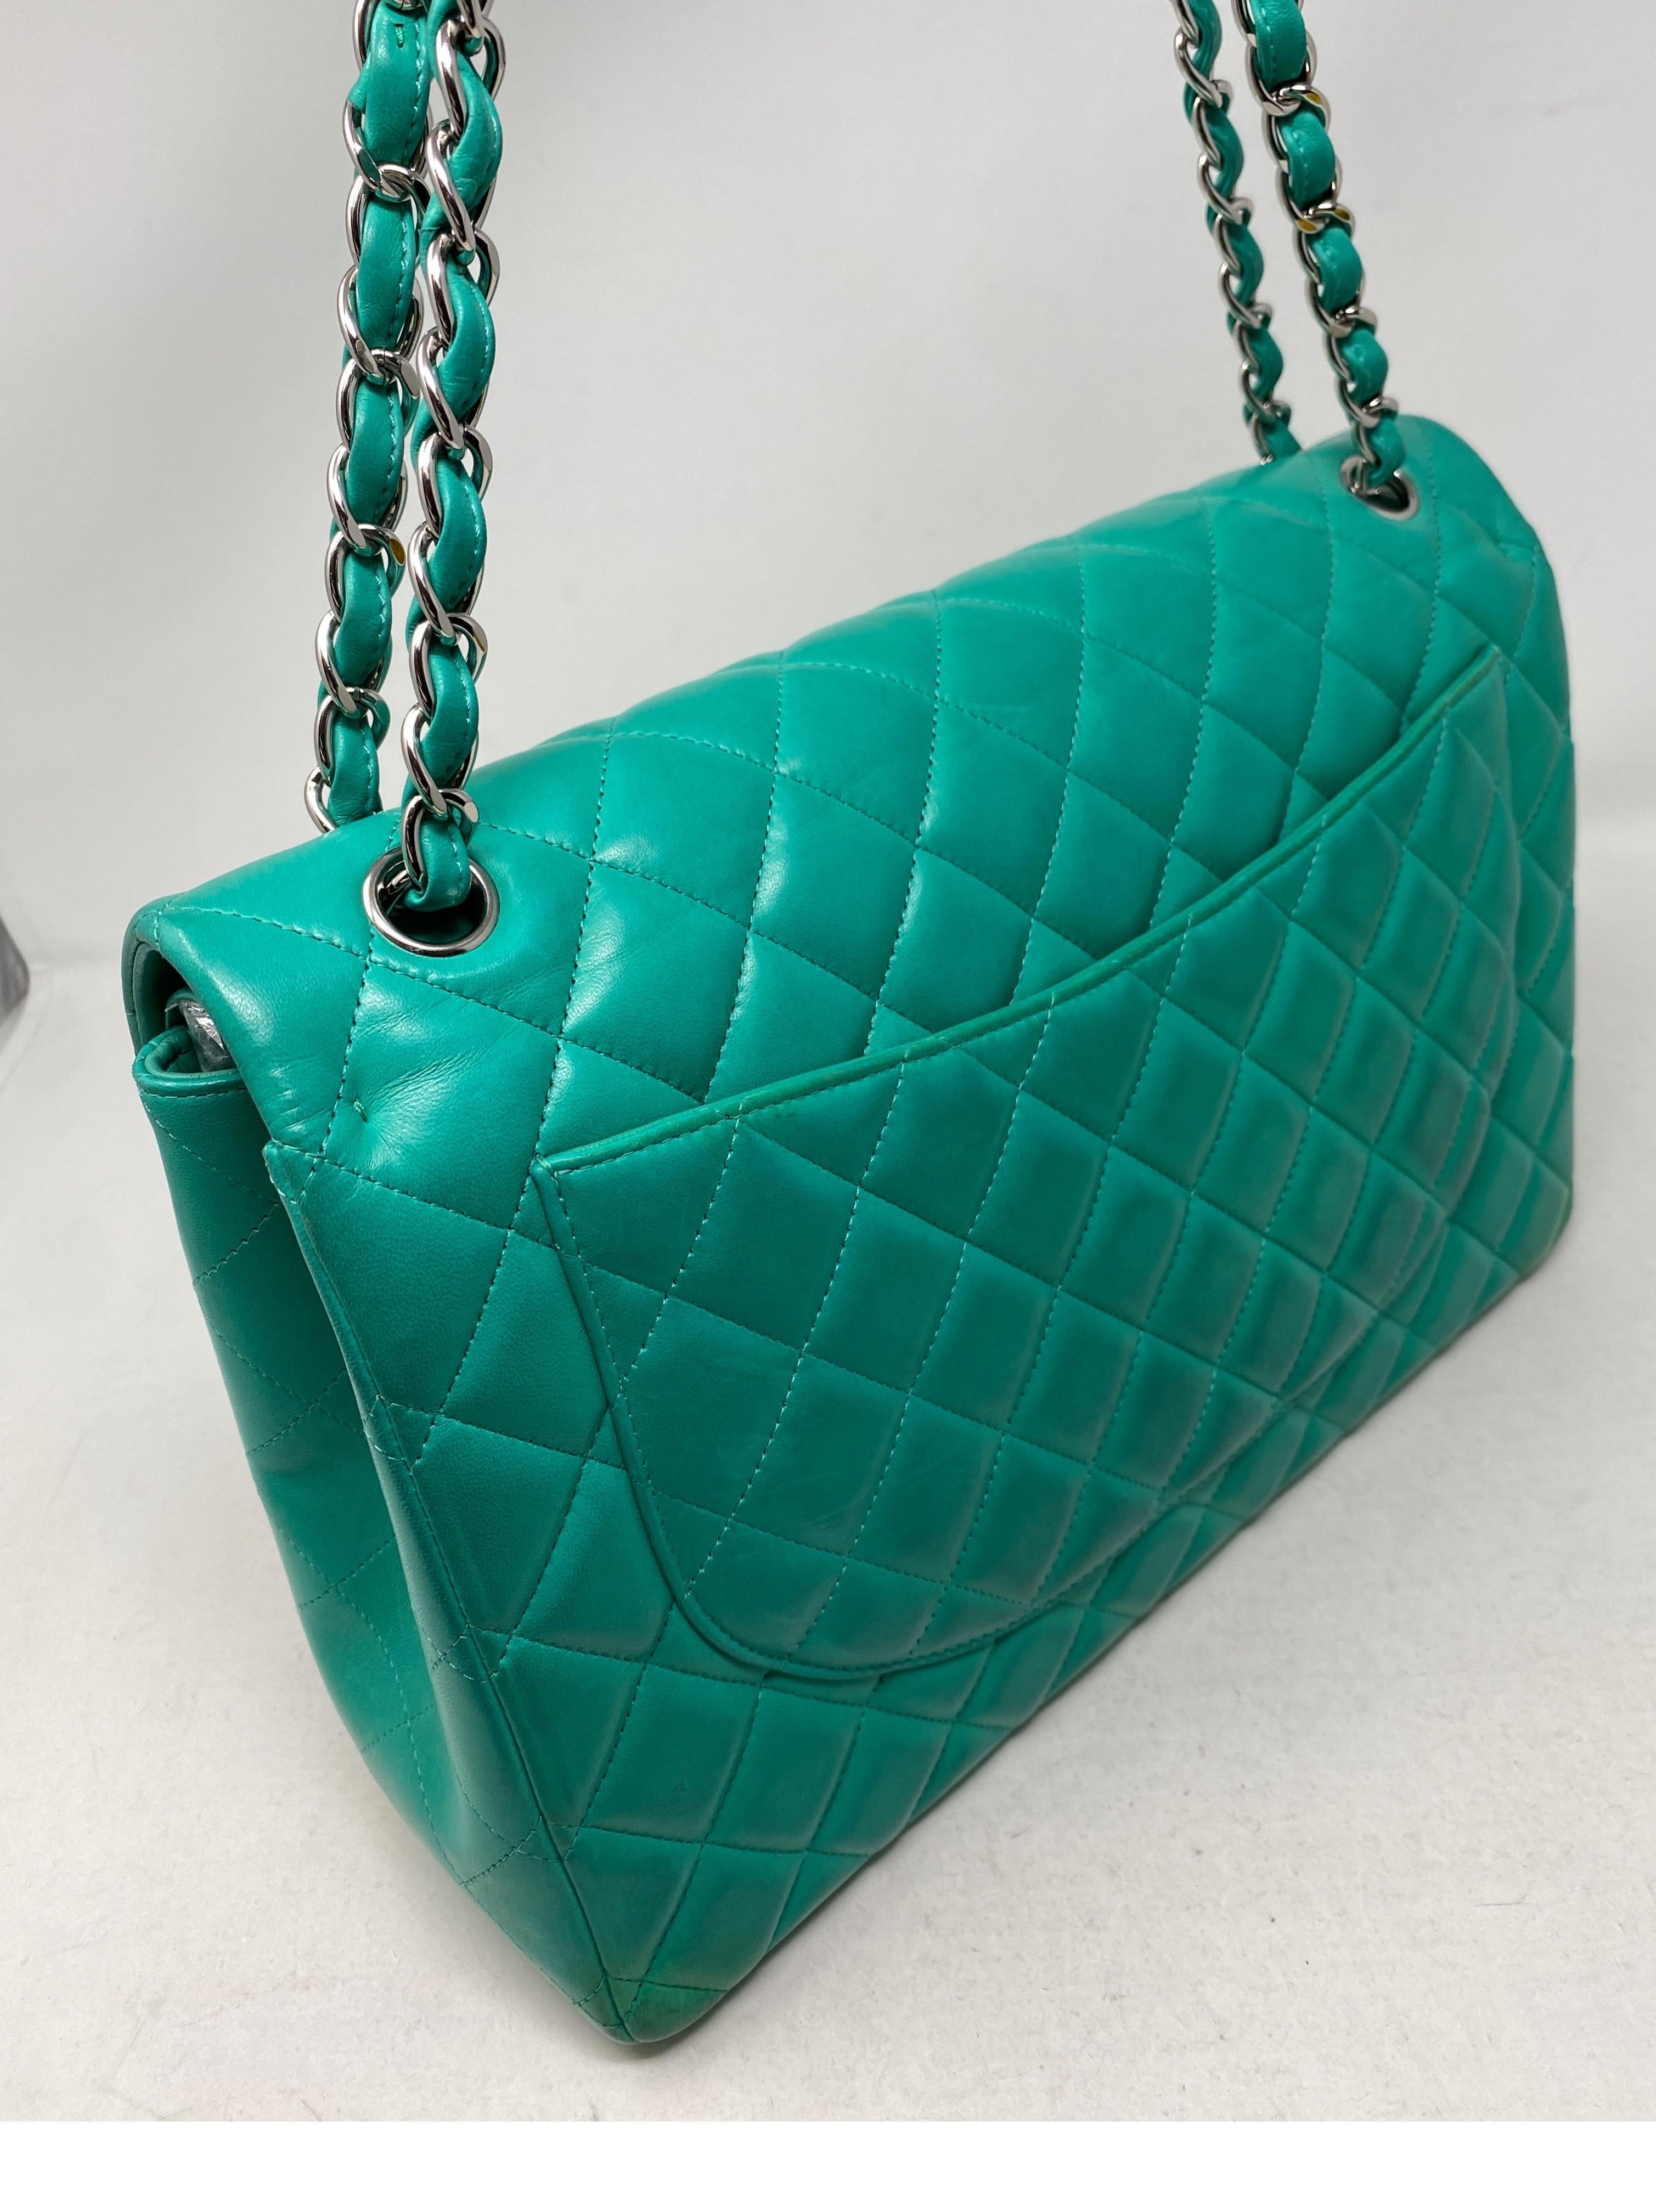 Chanel Teal Maxi Double Flap Bag 5